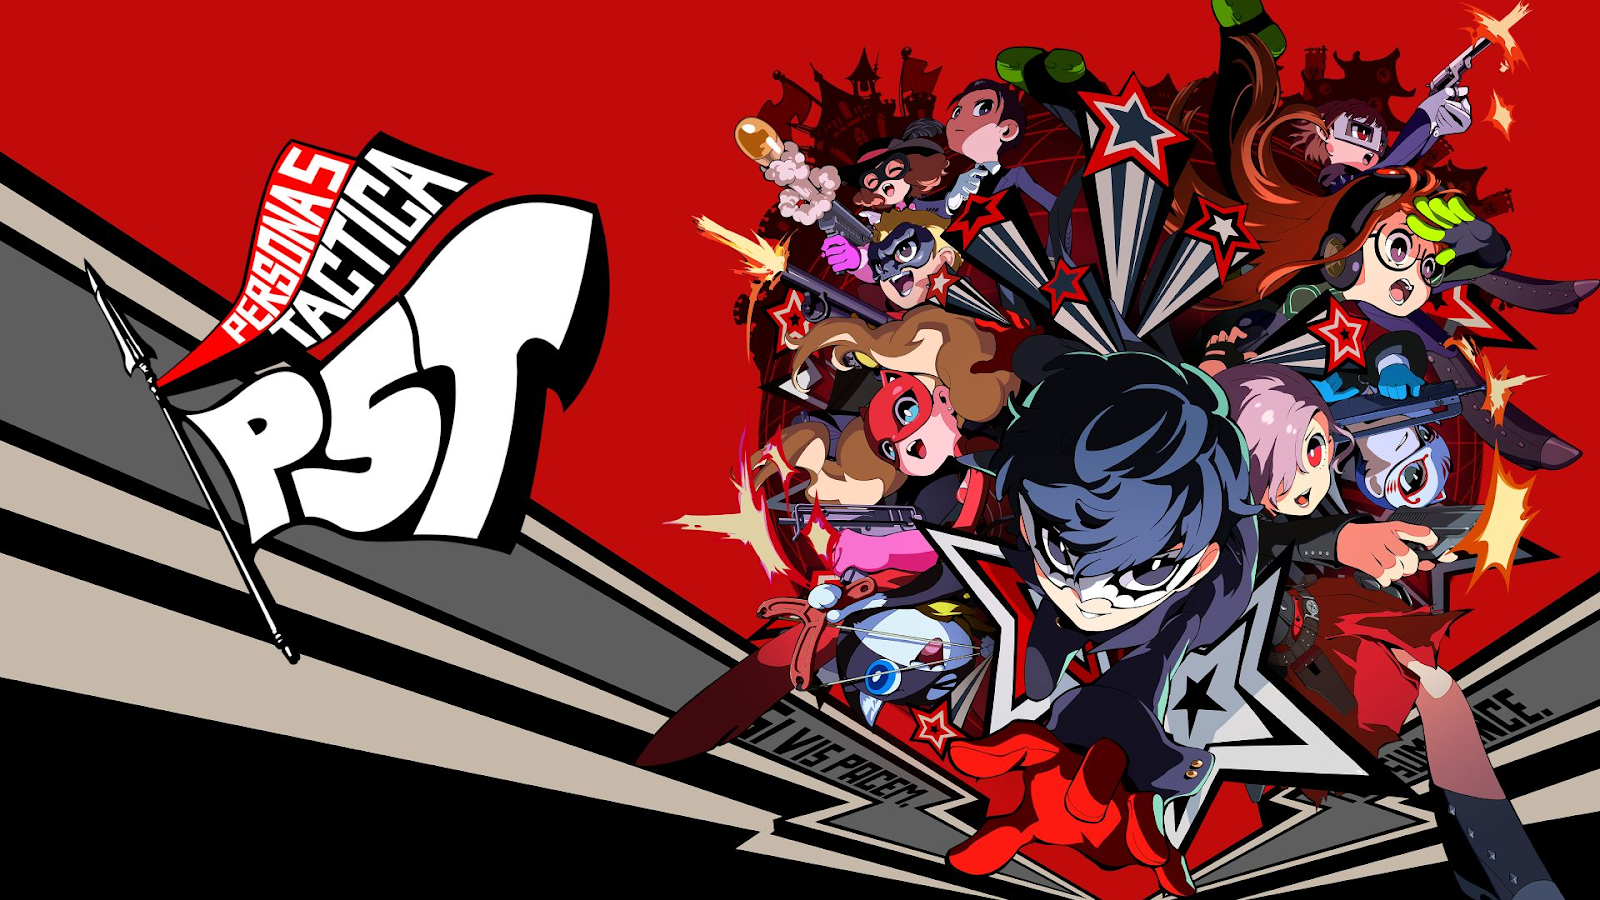 Persona 5 Royal Is Making Its Way To The Xbox Game Pass